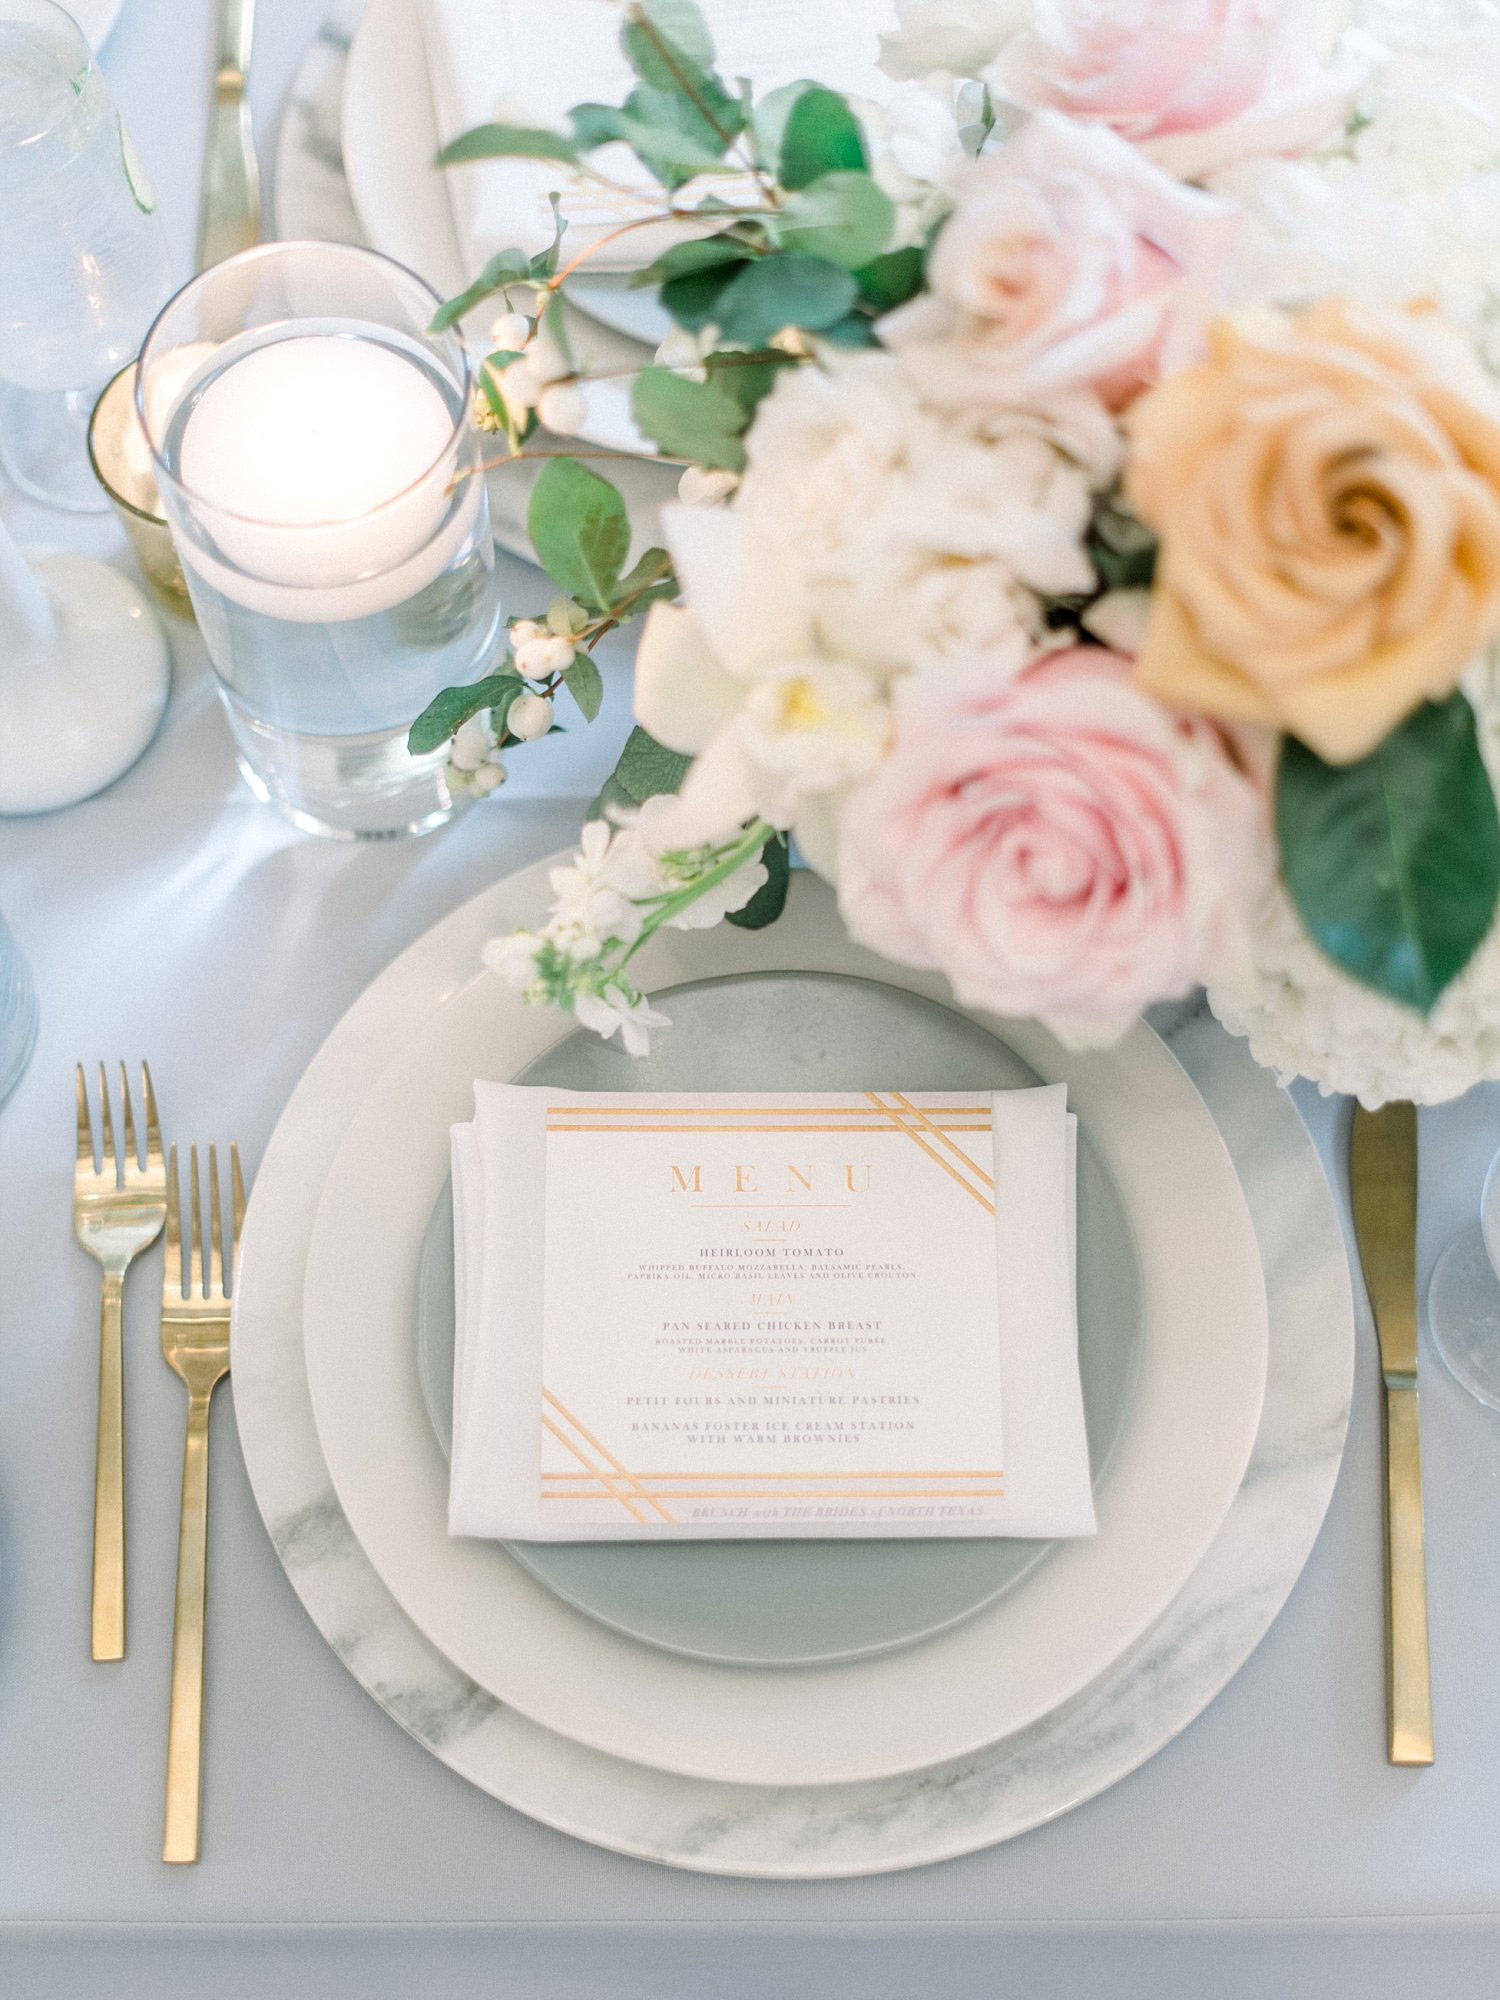 Place setting with marble charger and gold silverware